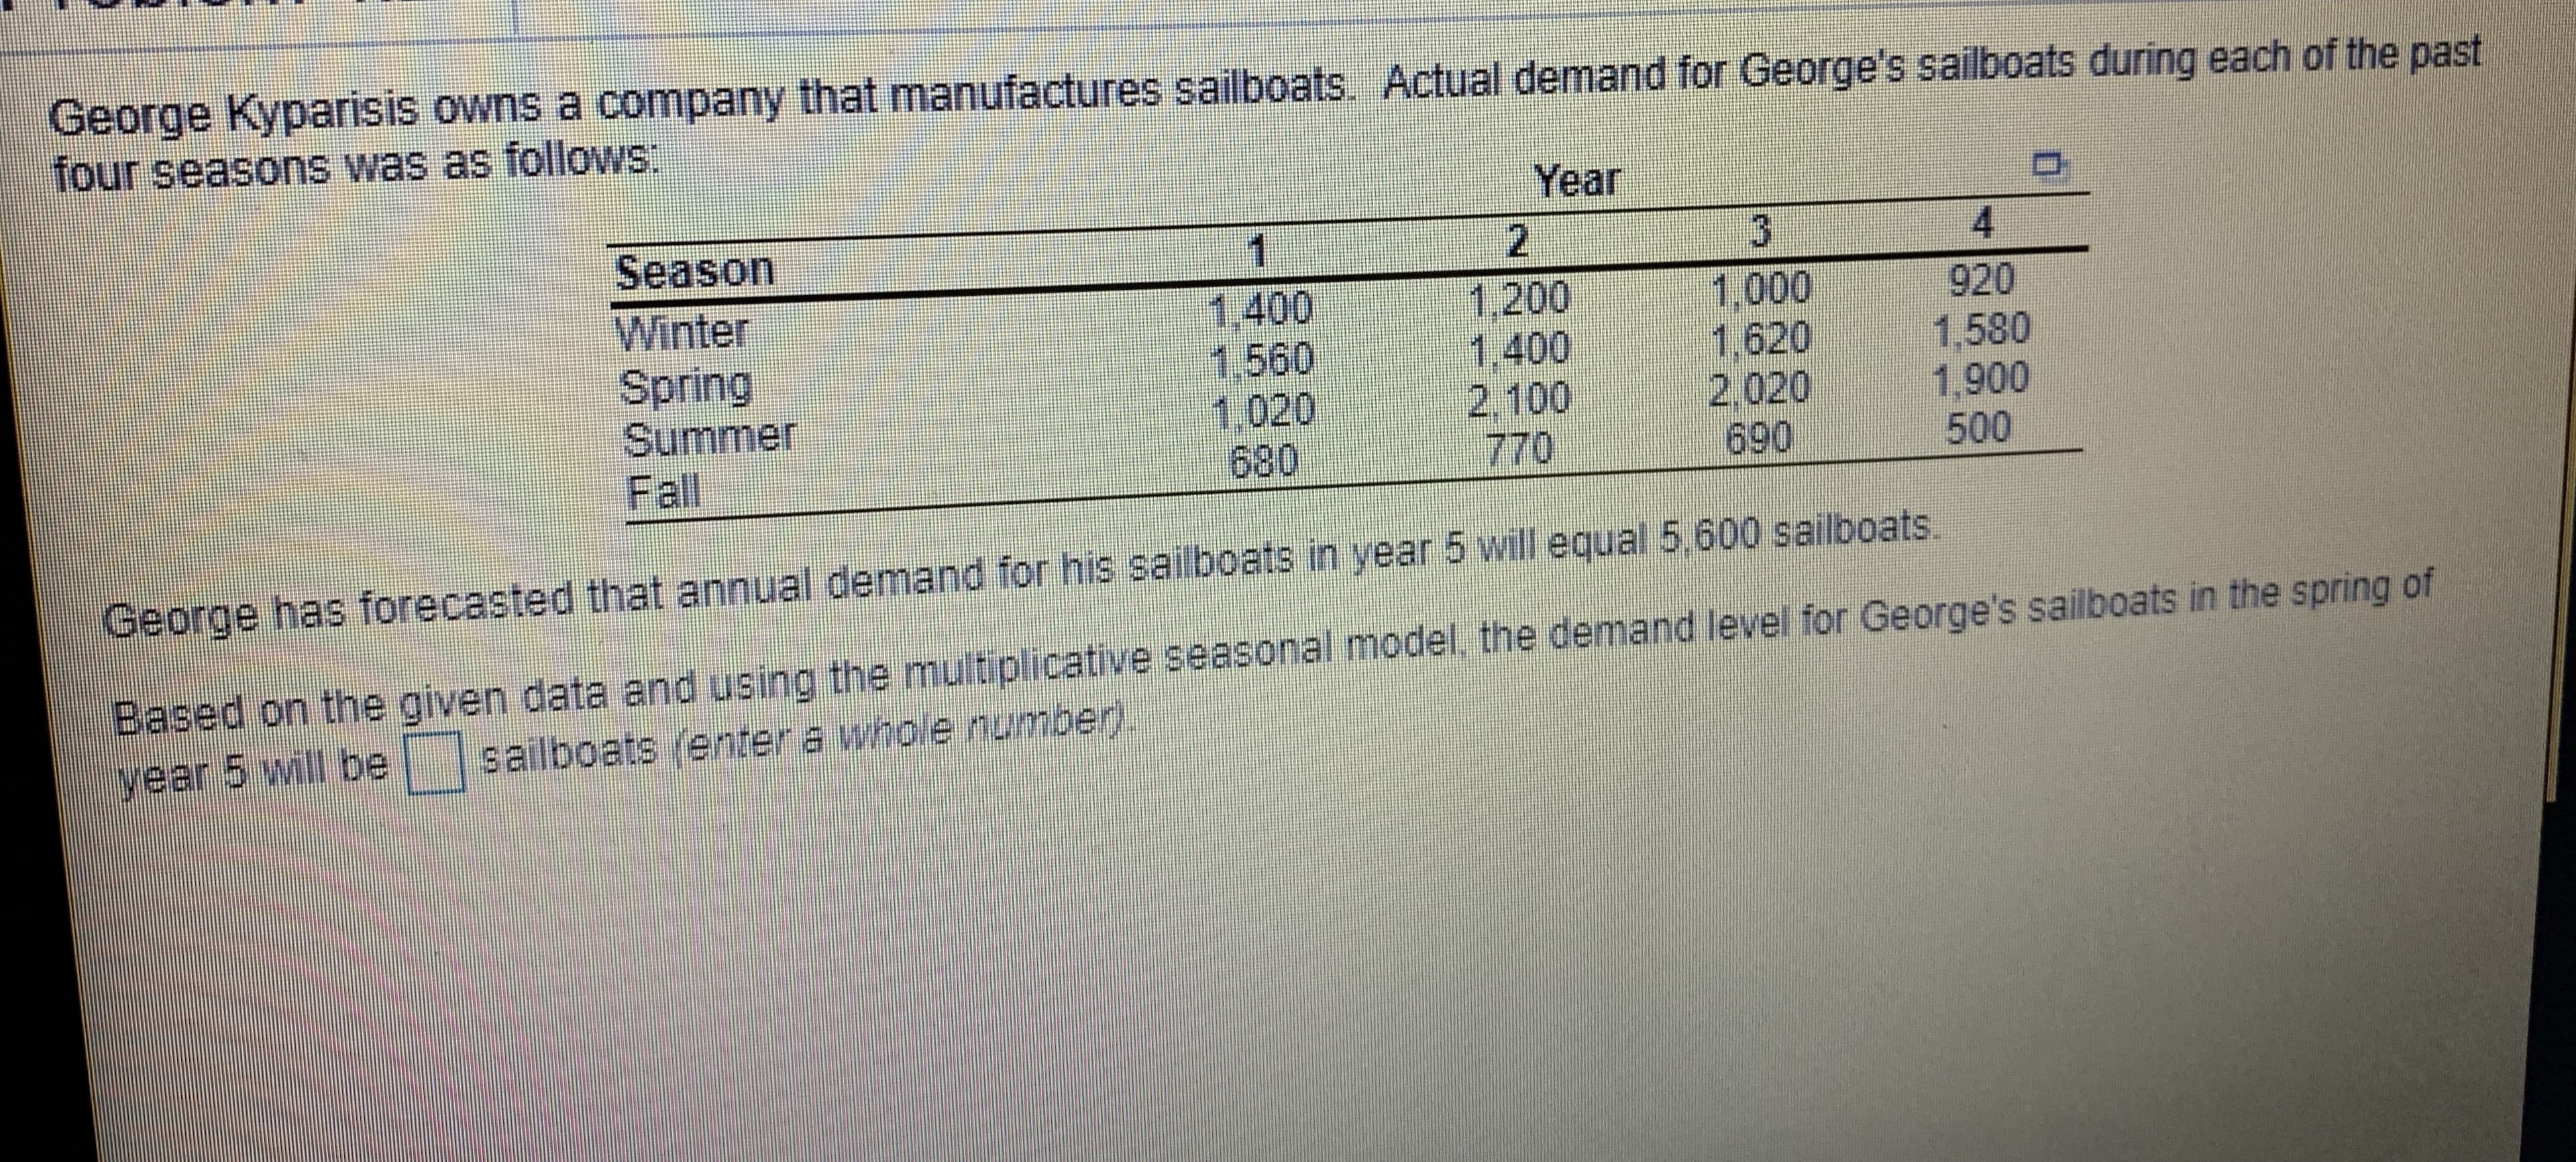 George Kyparisis owns a company that manufactures sailboats. Actual demand for George's sailboats during each of the past
four seasons was as follows:
Year
Season
Winter
Spring
Summer
Fall
1,000
1,400
1.560
1,020
680
1,200
1.400
920
1,6201,580
2.1002,020 1,900
770690500
George has forecasted that annual demand for his sailboats in year 5 will equal 5,600 sailboats.
Based on the given data and using the multiplicative seasonal model, the demand level for George's saliboats in the spring of
year 5 will besailboats (enter a whole number)
